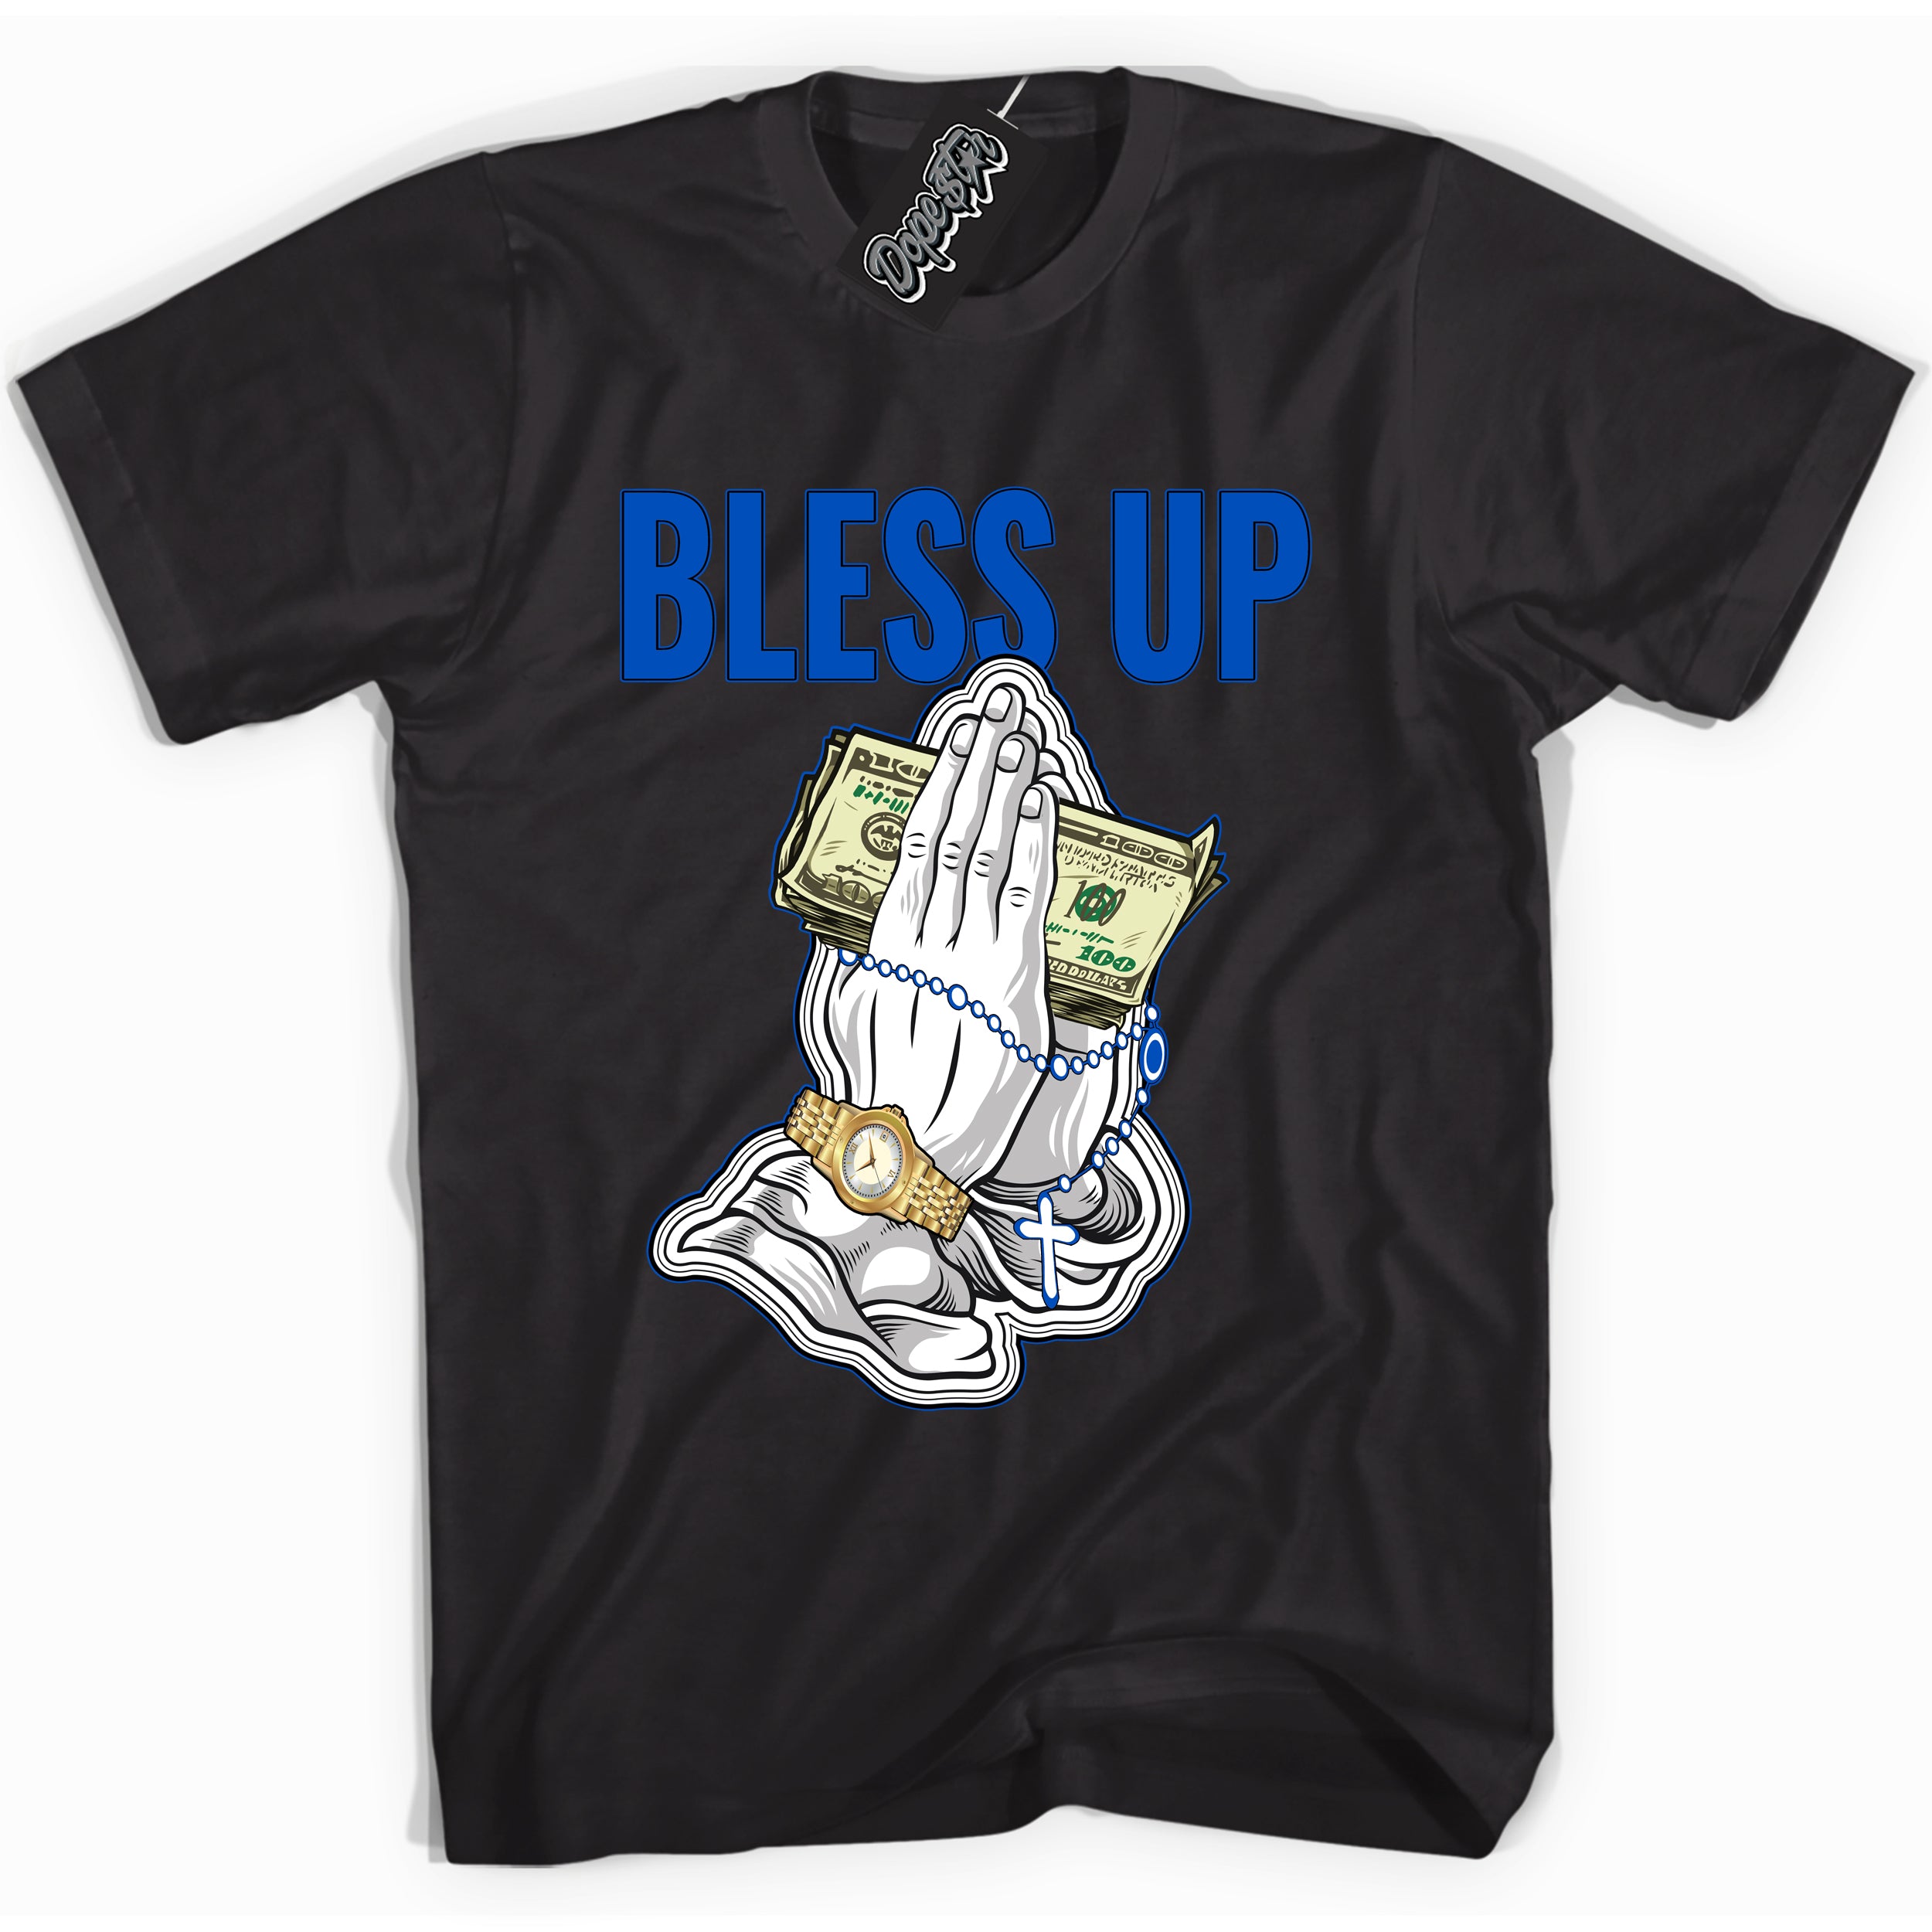 Cool Black graphic tee with "Bless Up" design, that perfectly matches Royal Reimagined 1s sneakers 